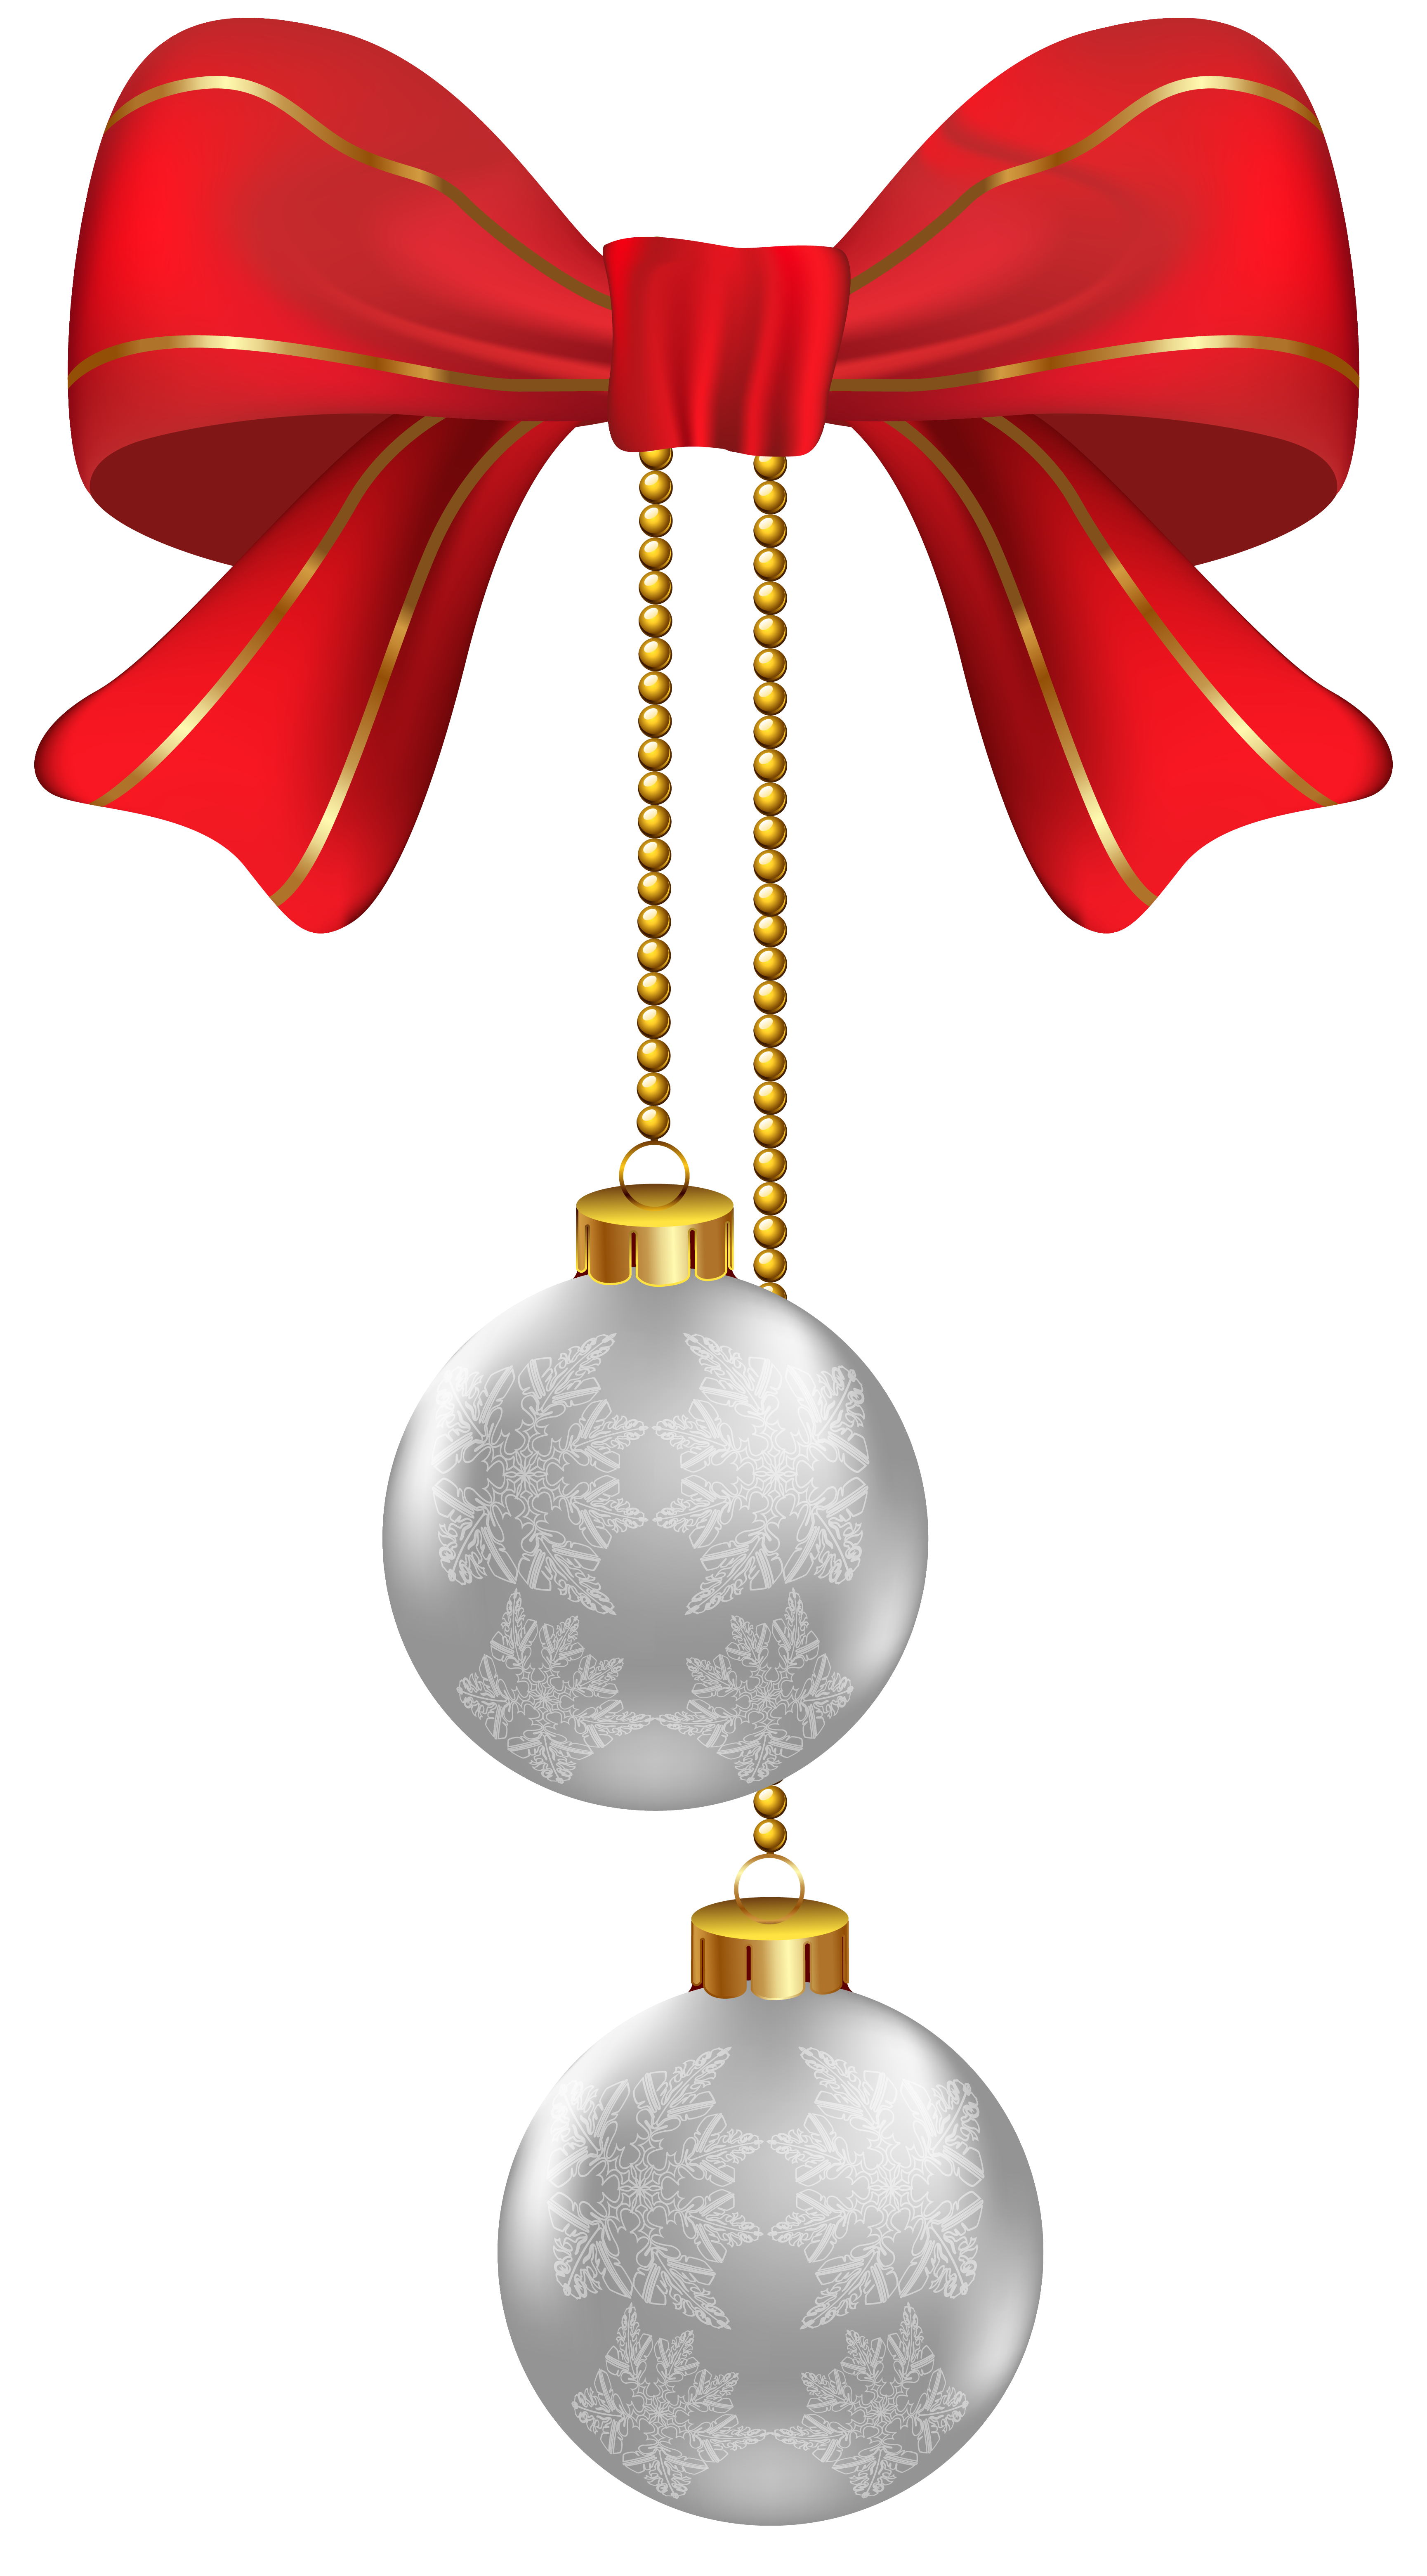 Poinsettias clipart ornament. Hanging christmas silver ornaments